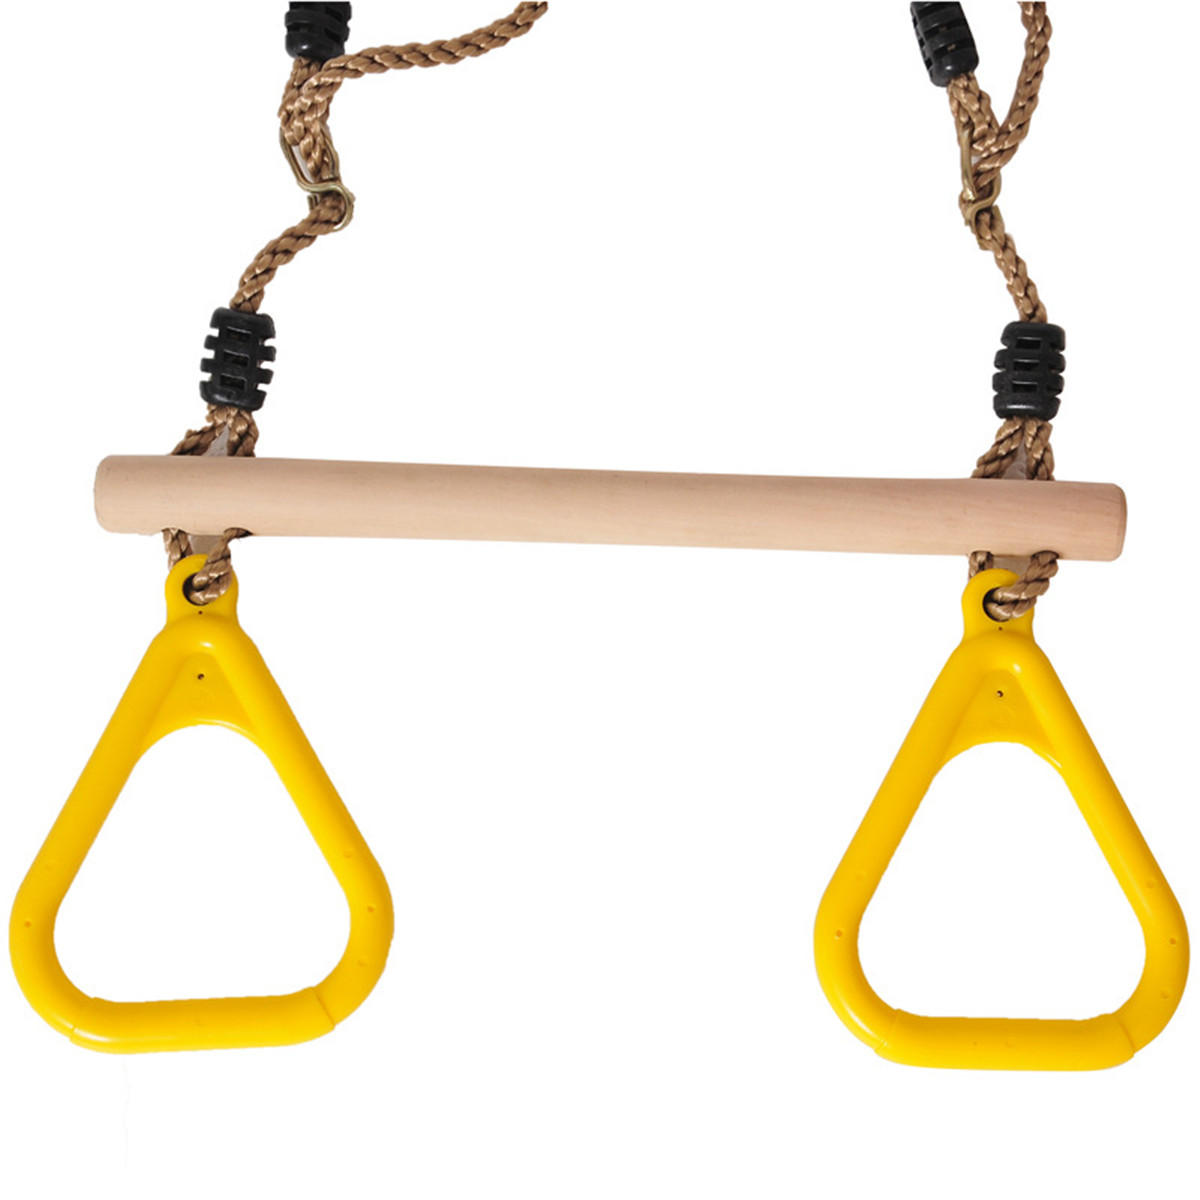 

Children's Wooden Trapeze Gymnastic Rings Kids Swing Training Accessory Fitness Equipement